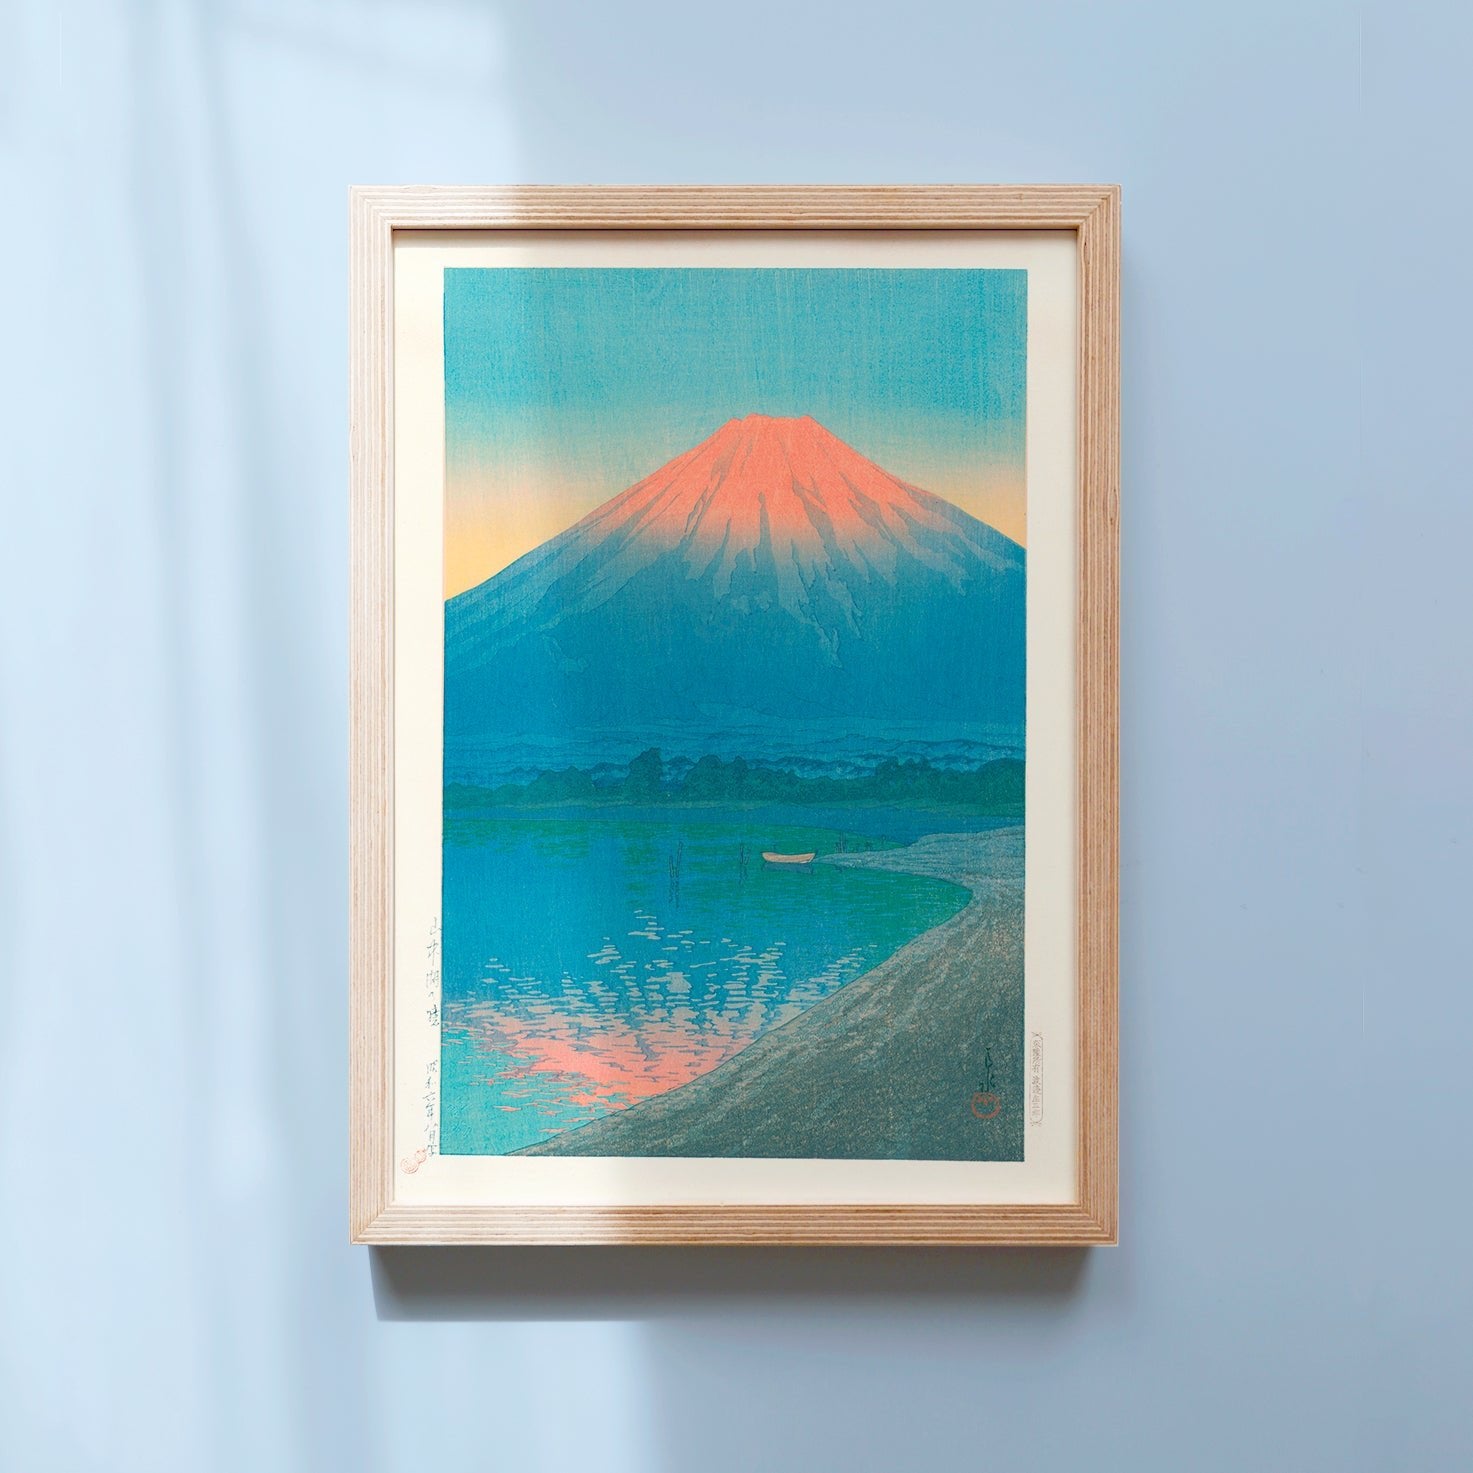 Framed Japanese Art Poster by Kawase Hasui, Mt. Fuji turning pink in the morning glow